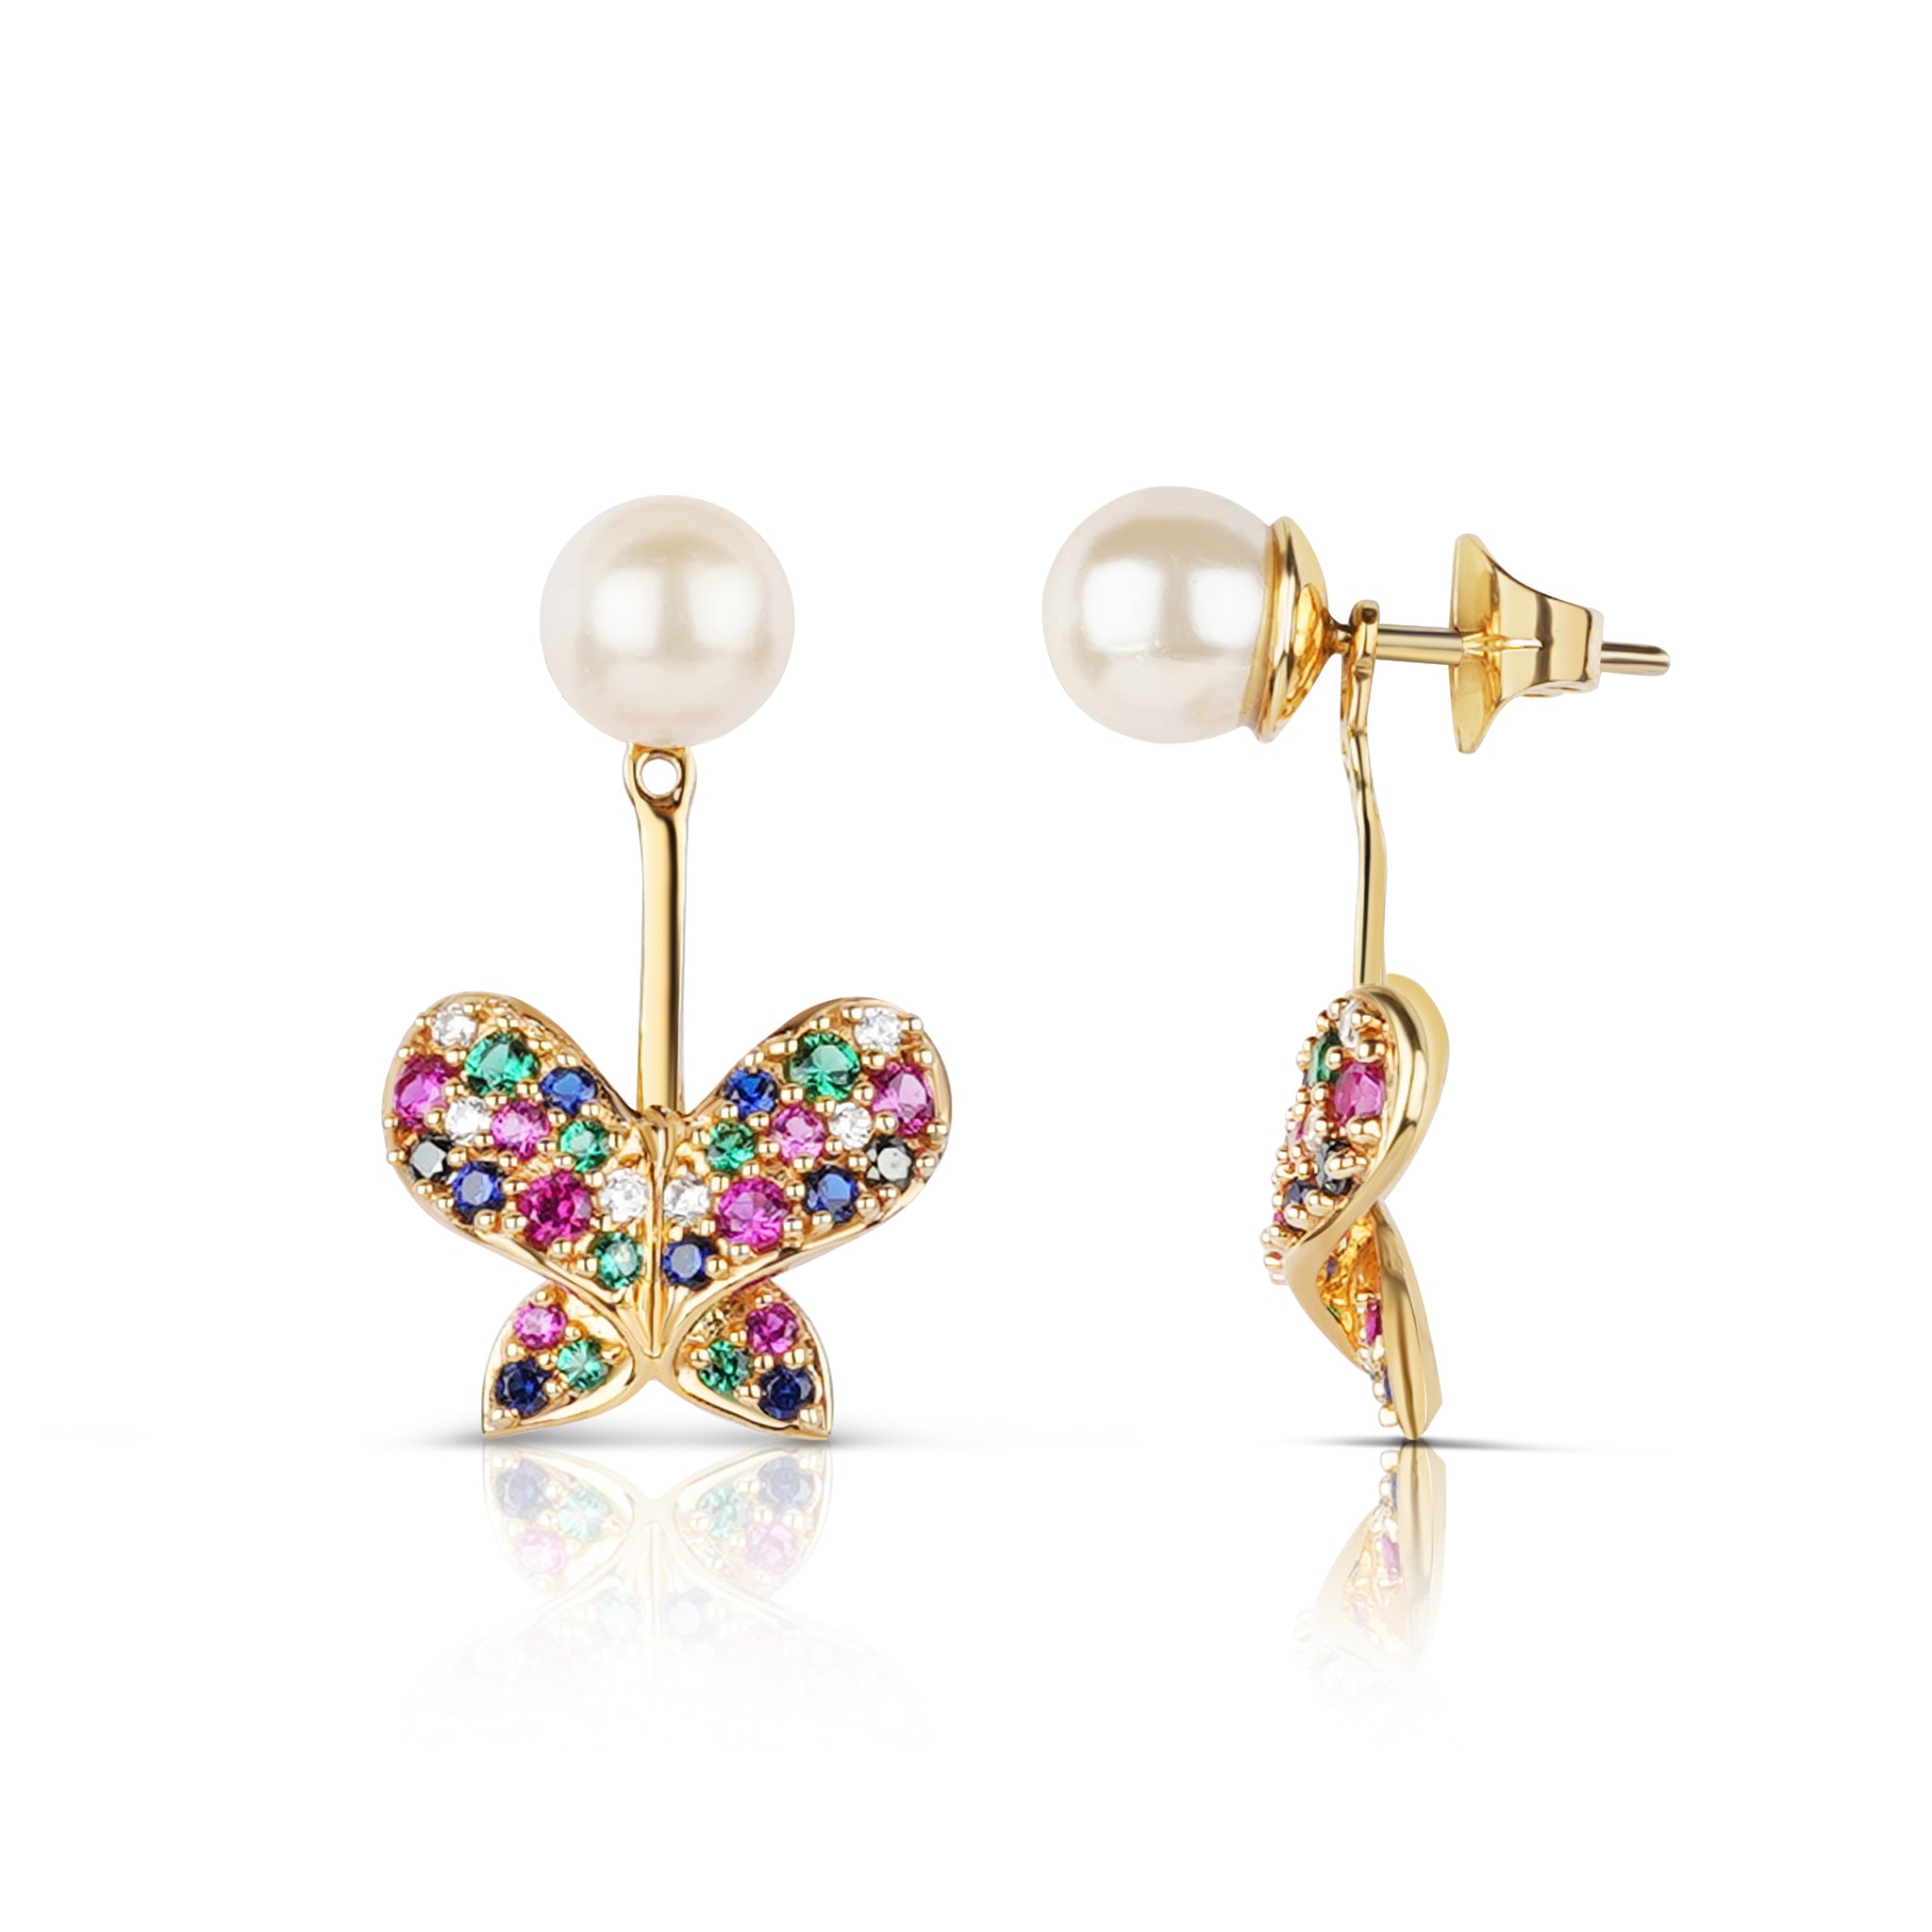 Floral Garden Pearl Earrings - Vibrant Yellow